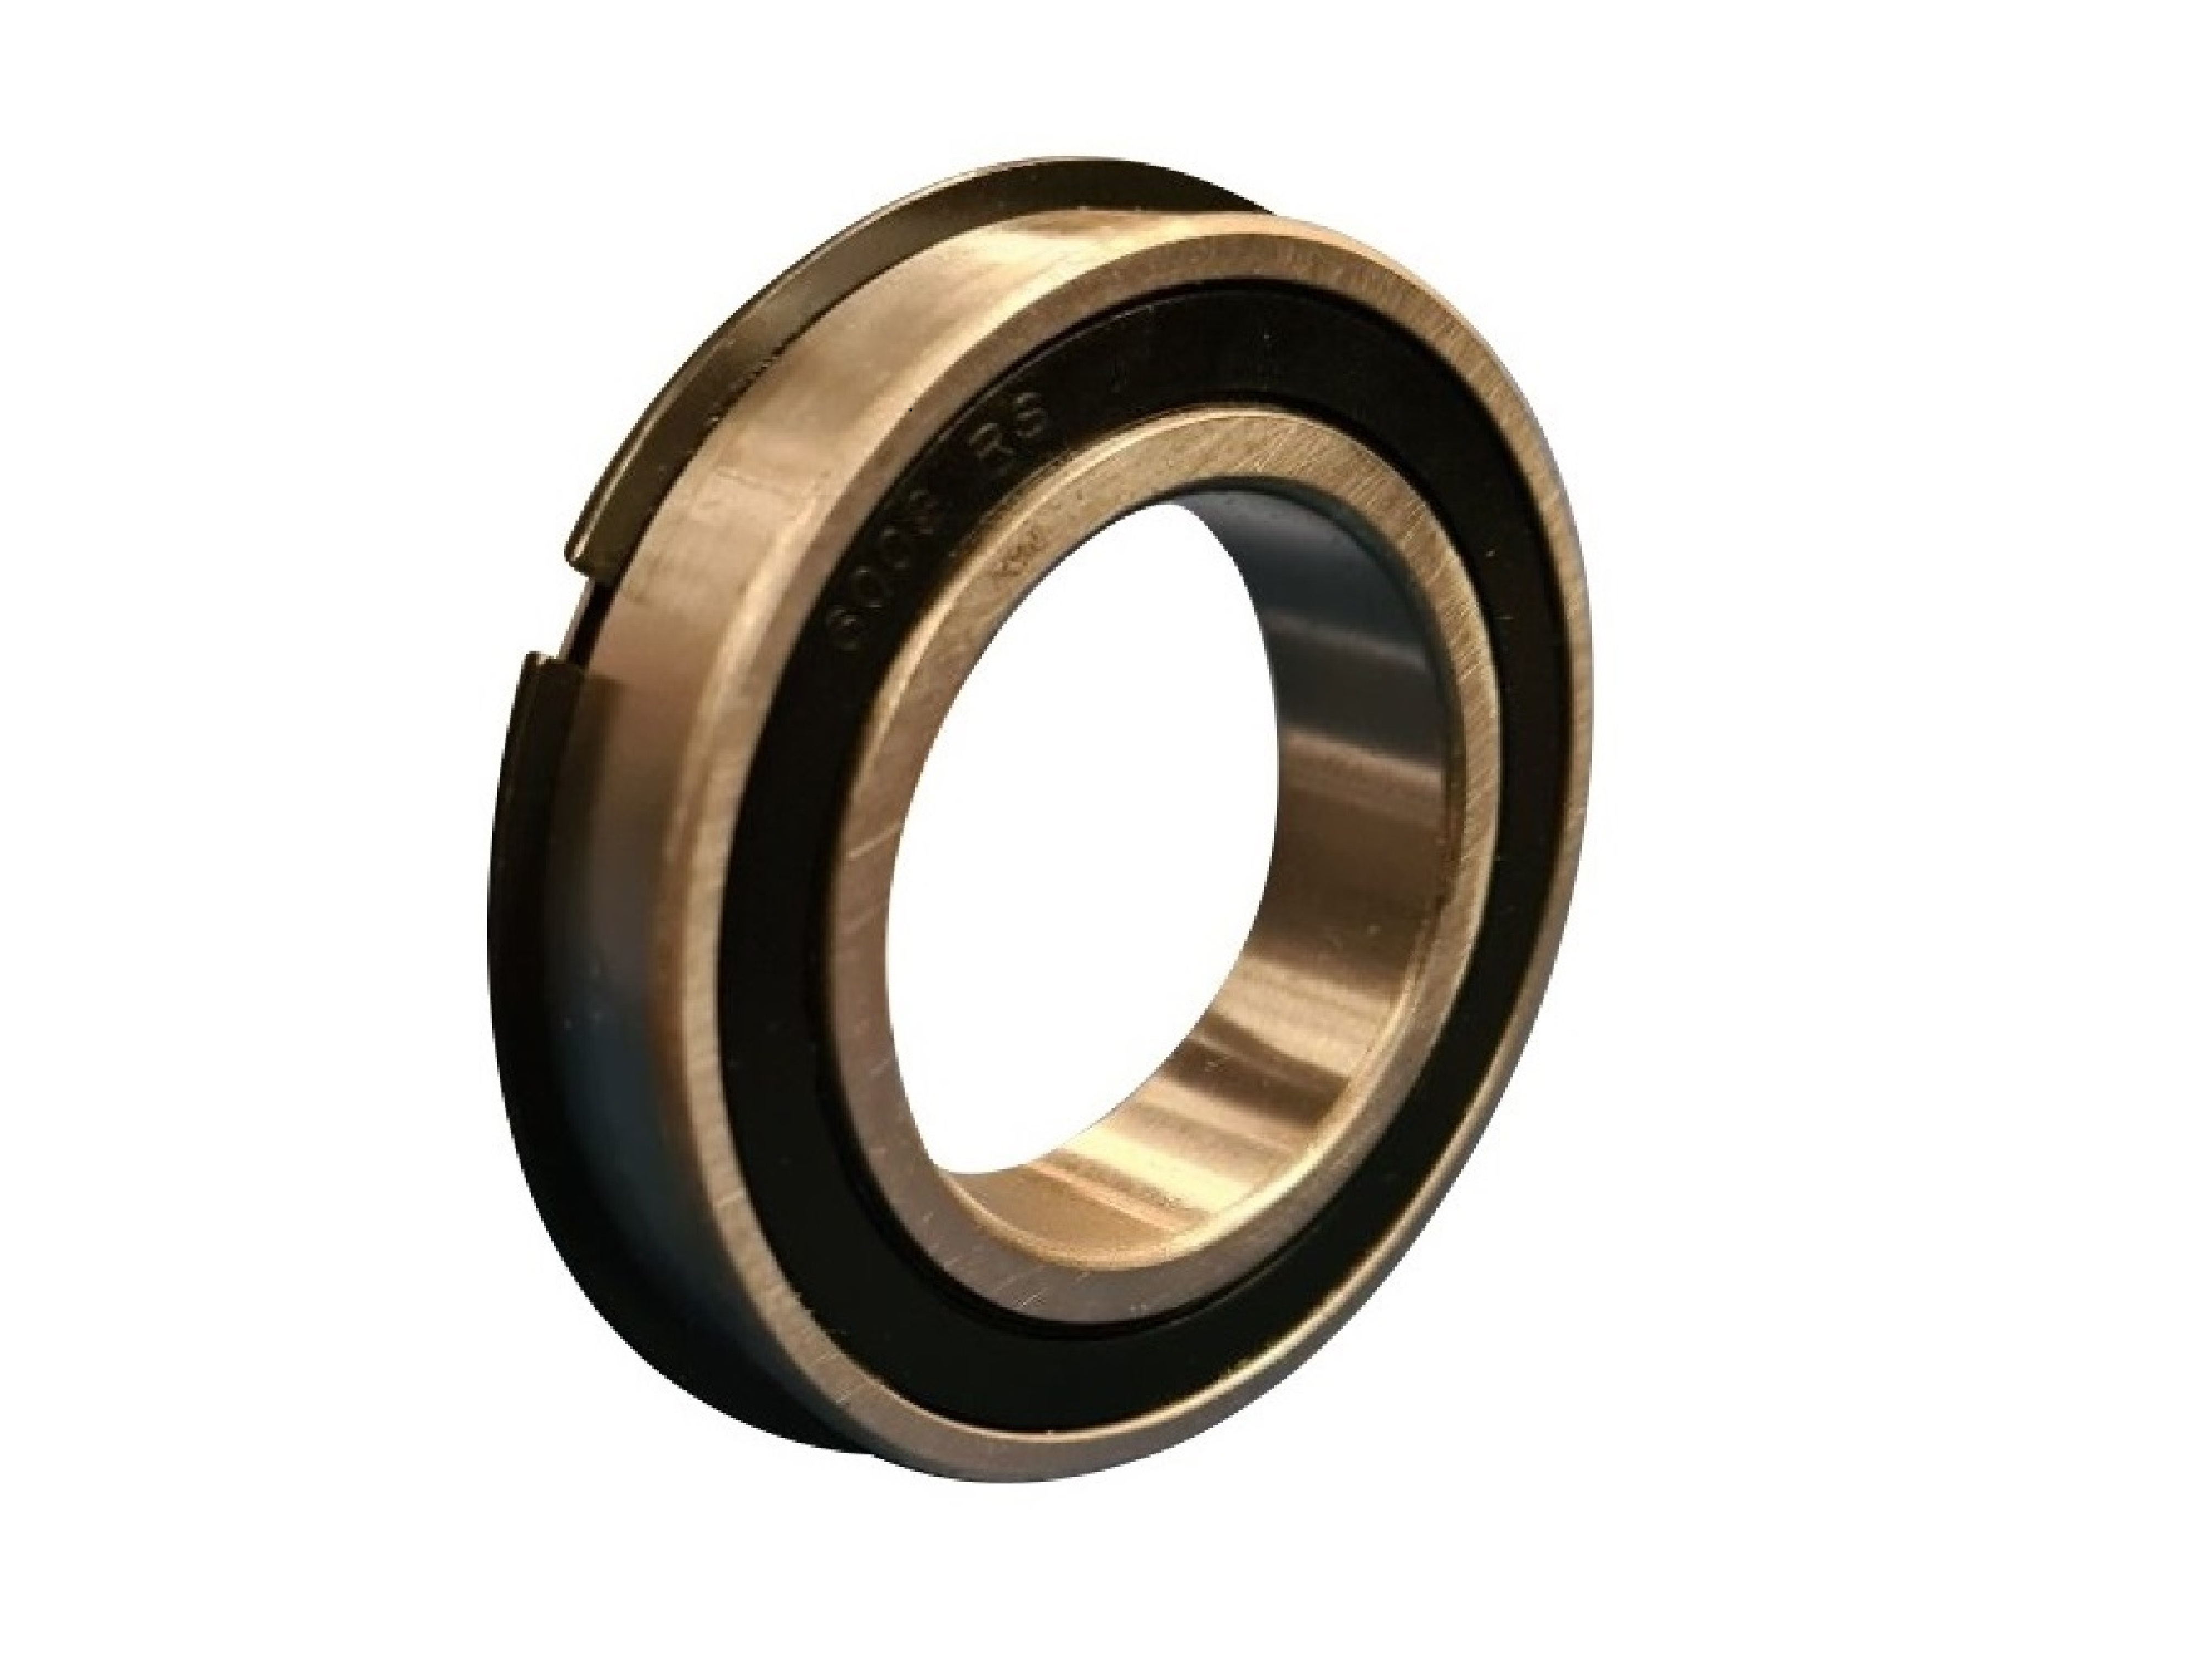 ZEN 6205-2RS-NR Sealed Ball Bearing With Snap Ring 25mm x 52mm x 15mm